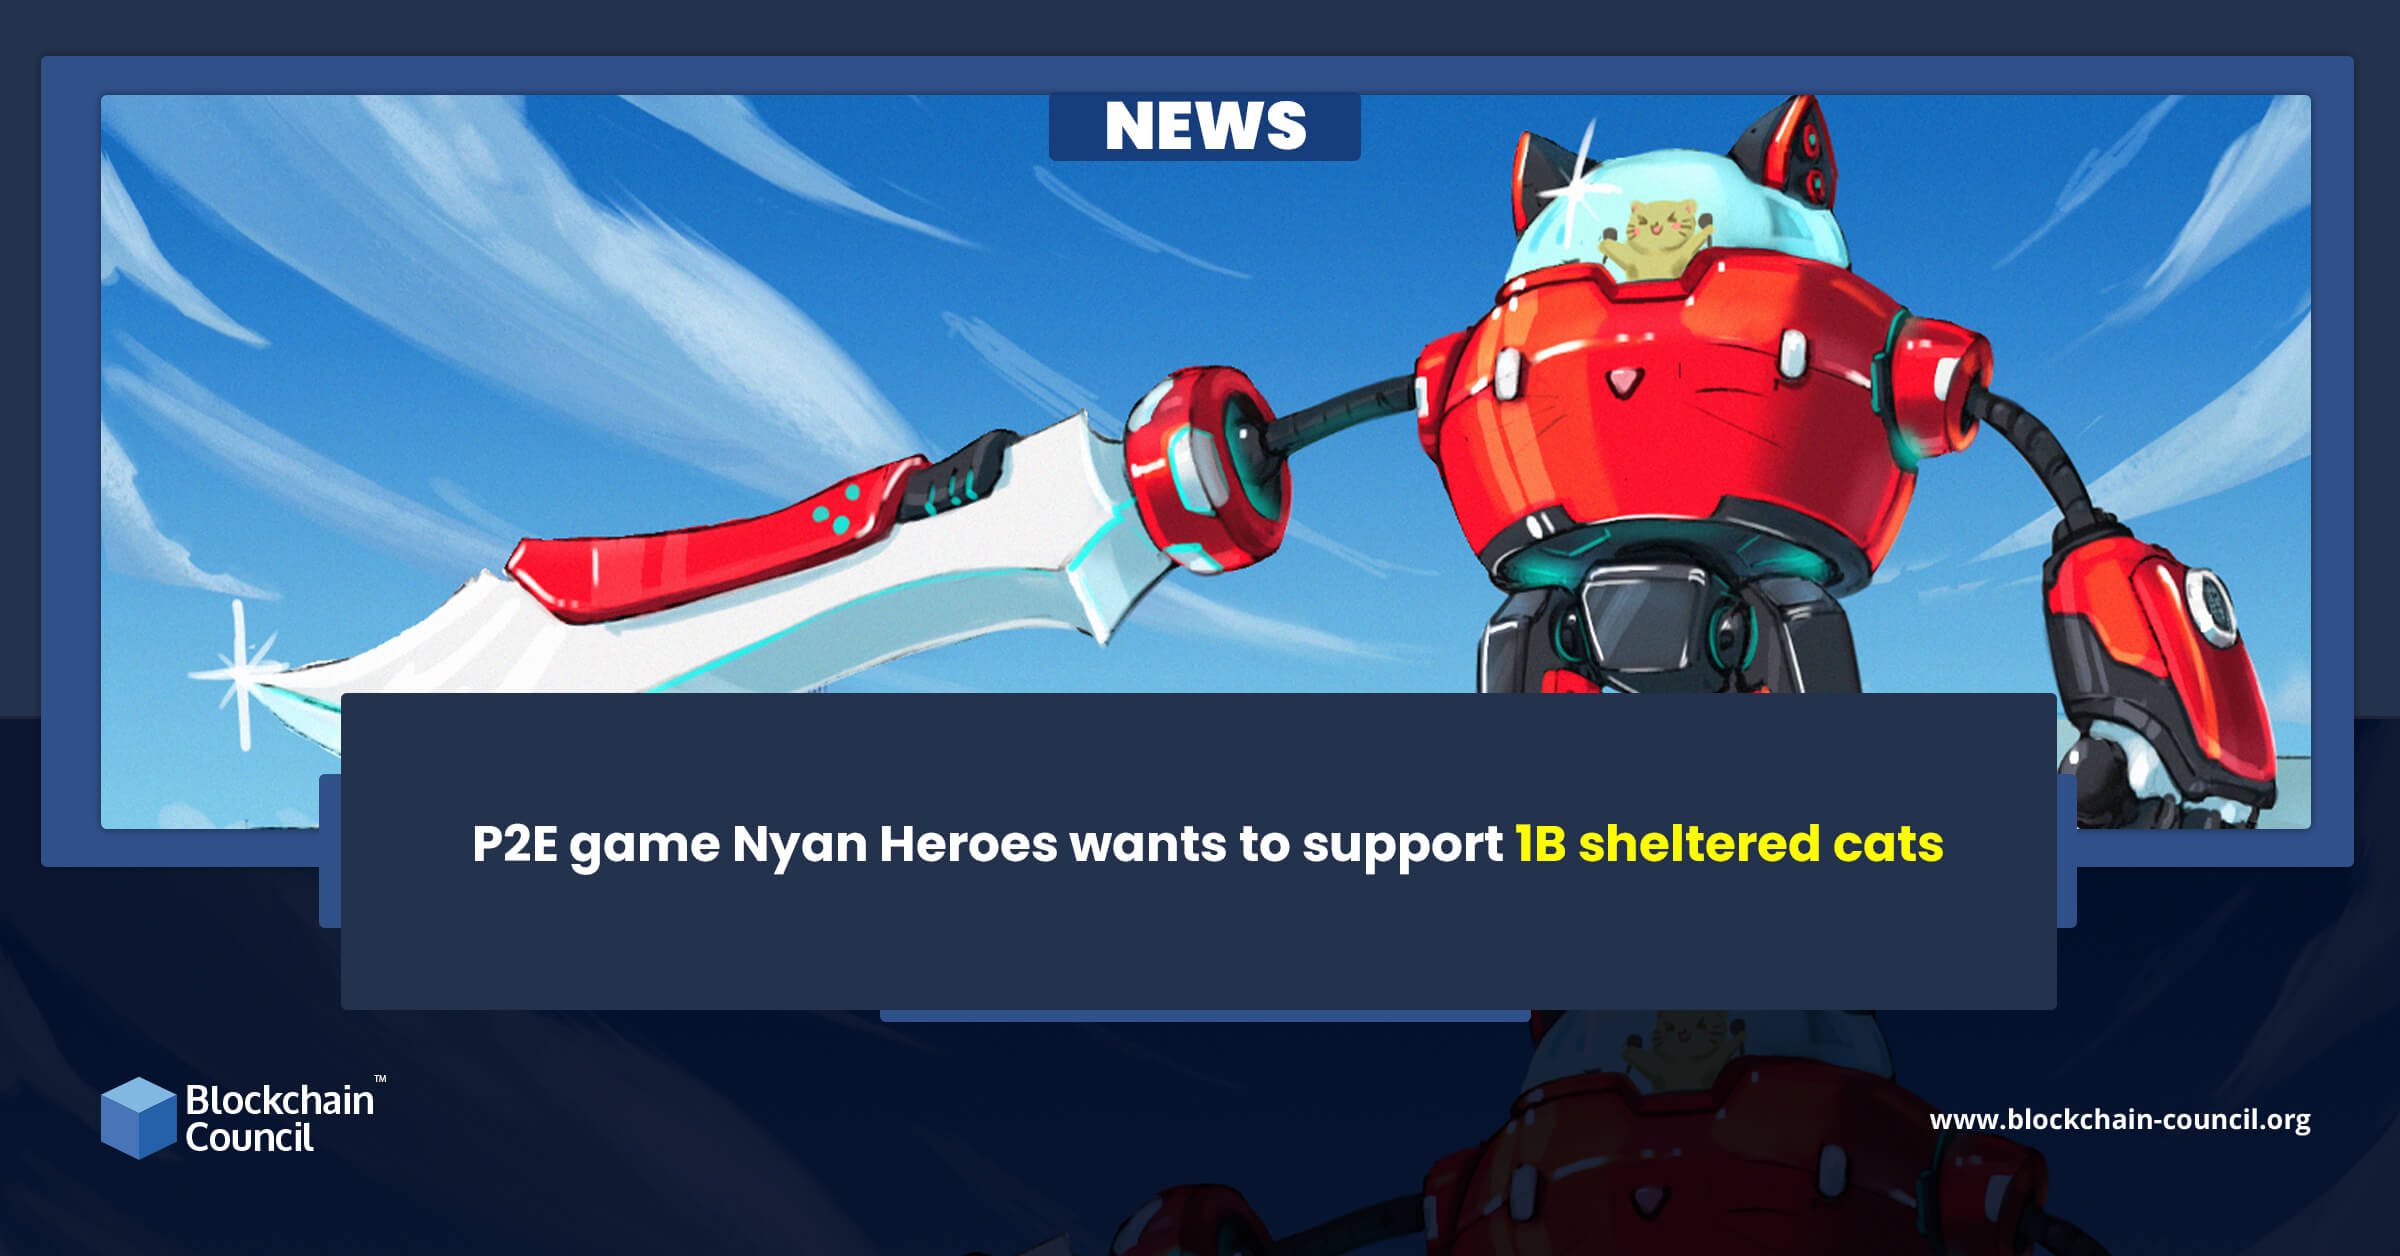 P2E game Nyan Heroes wants to support 1B sheltered cats